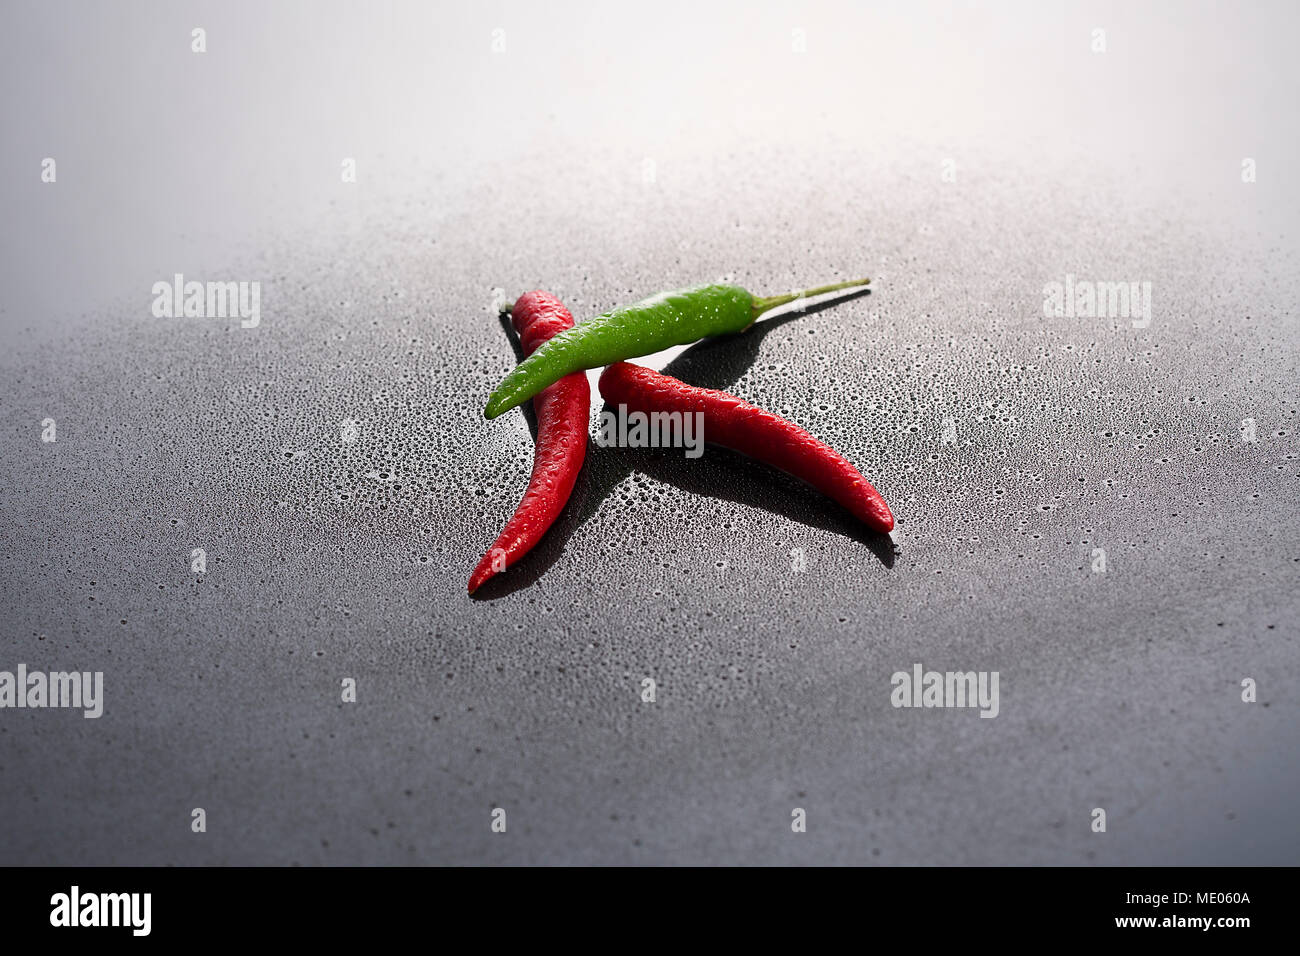 nice shot for green and red chilies Stock Photo